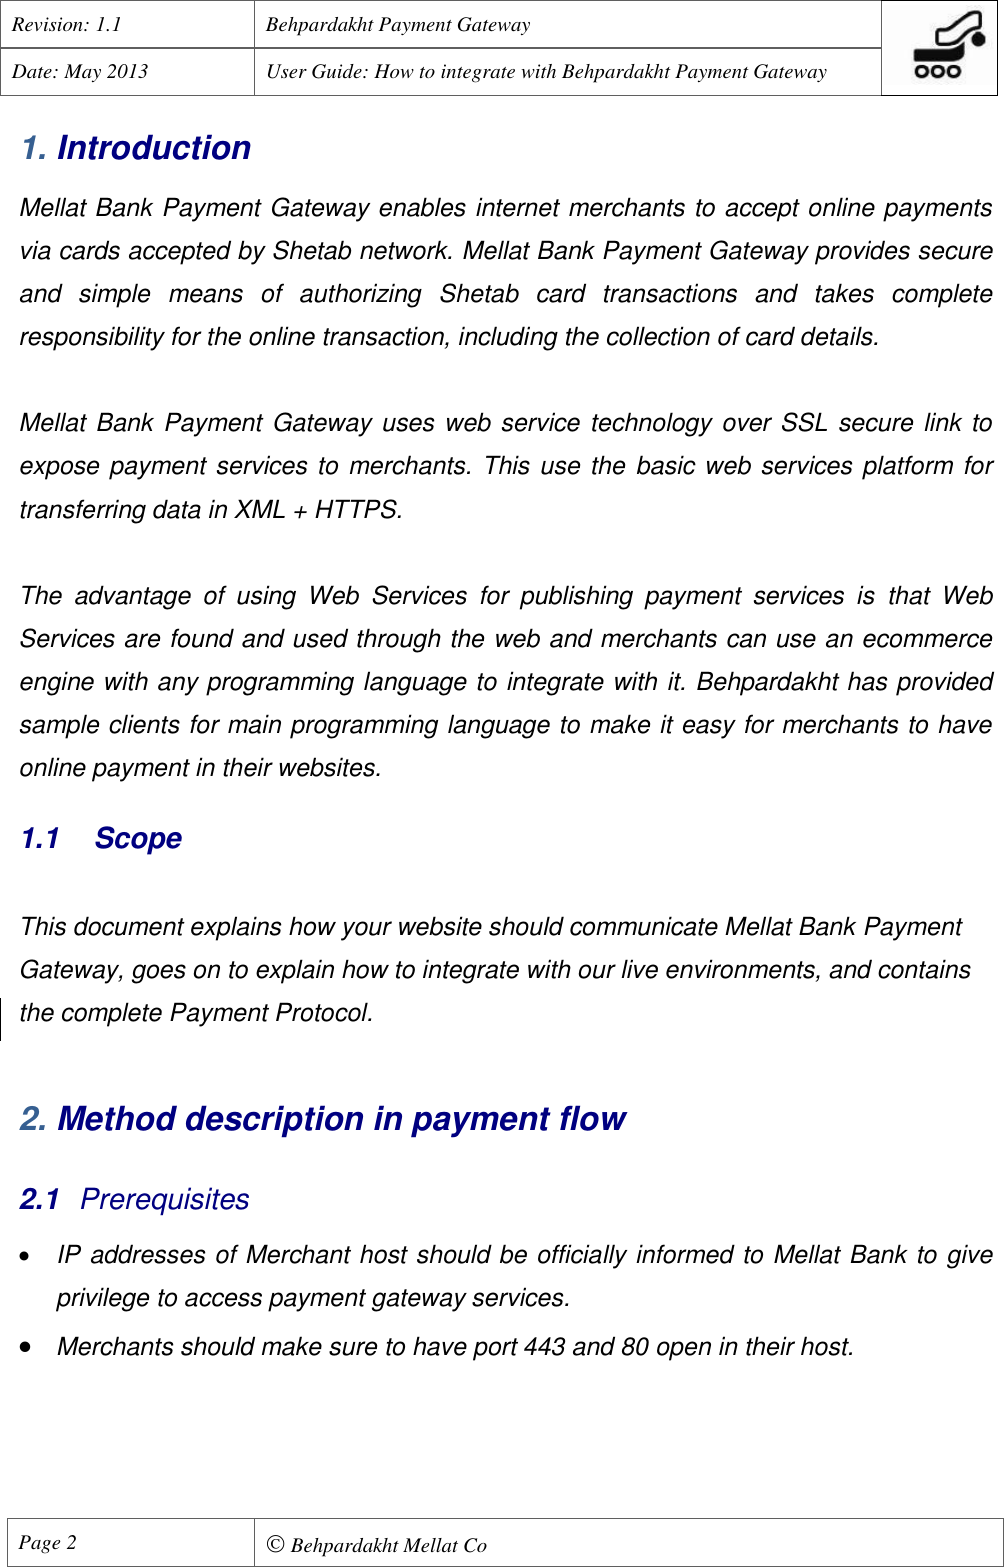 Page 3 of 11 - Behpardakht Mellat - Payment Gateway PGW User Manual English Ver 1.1